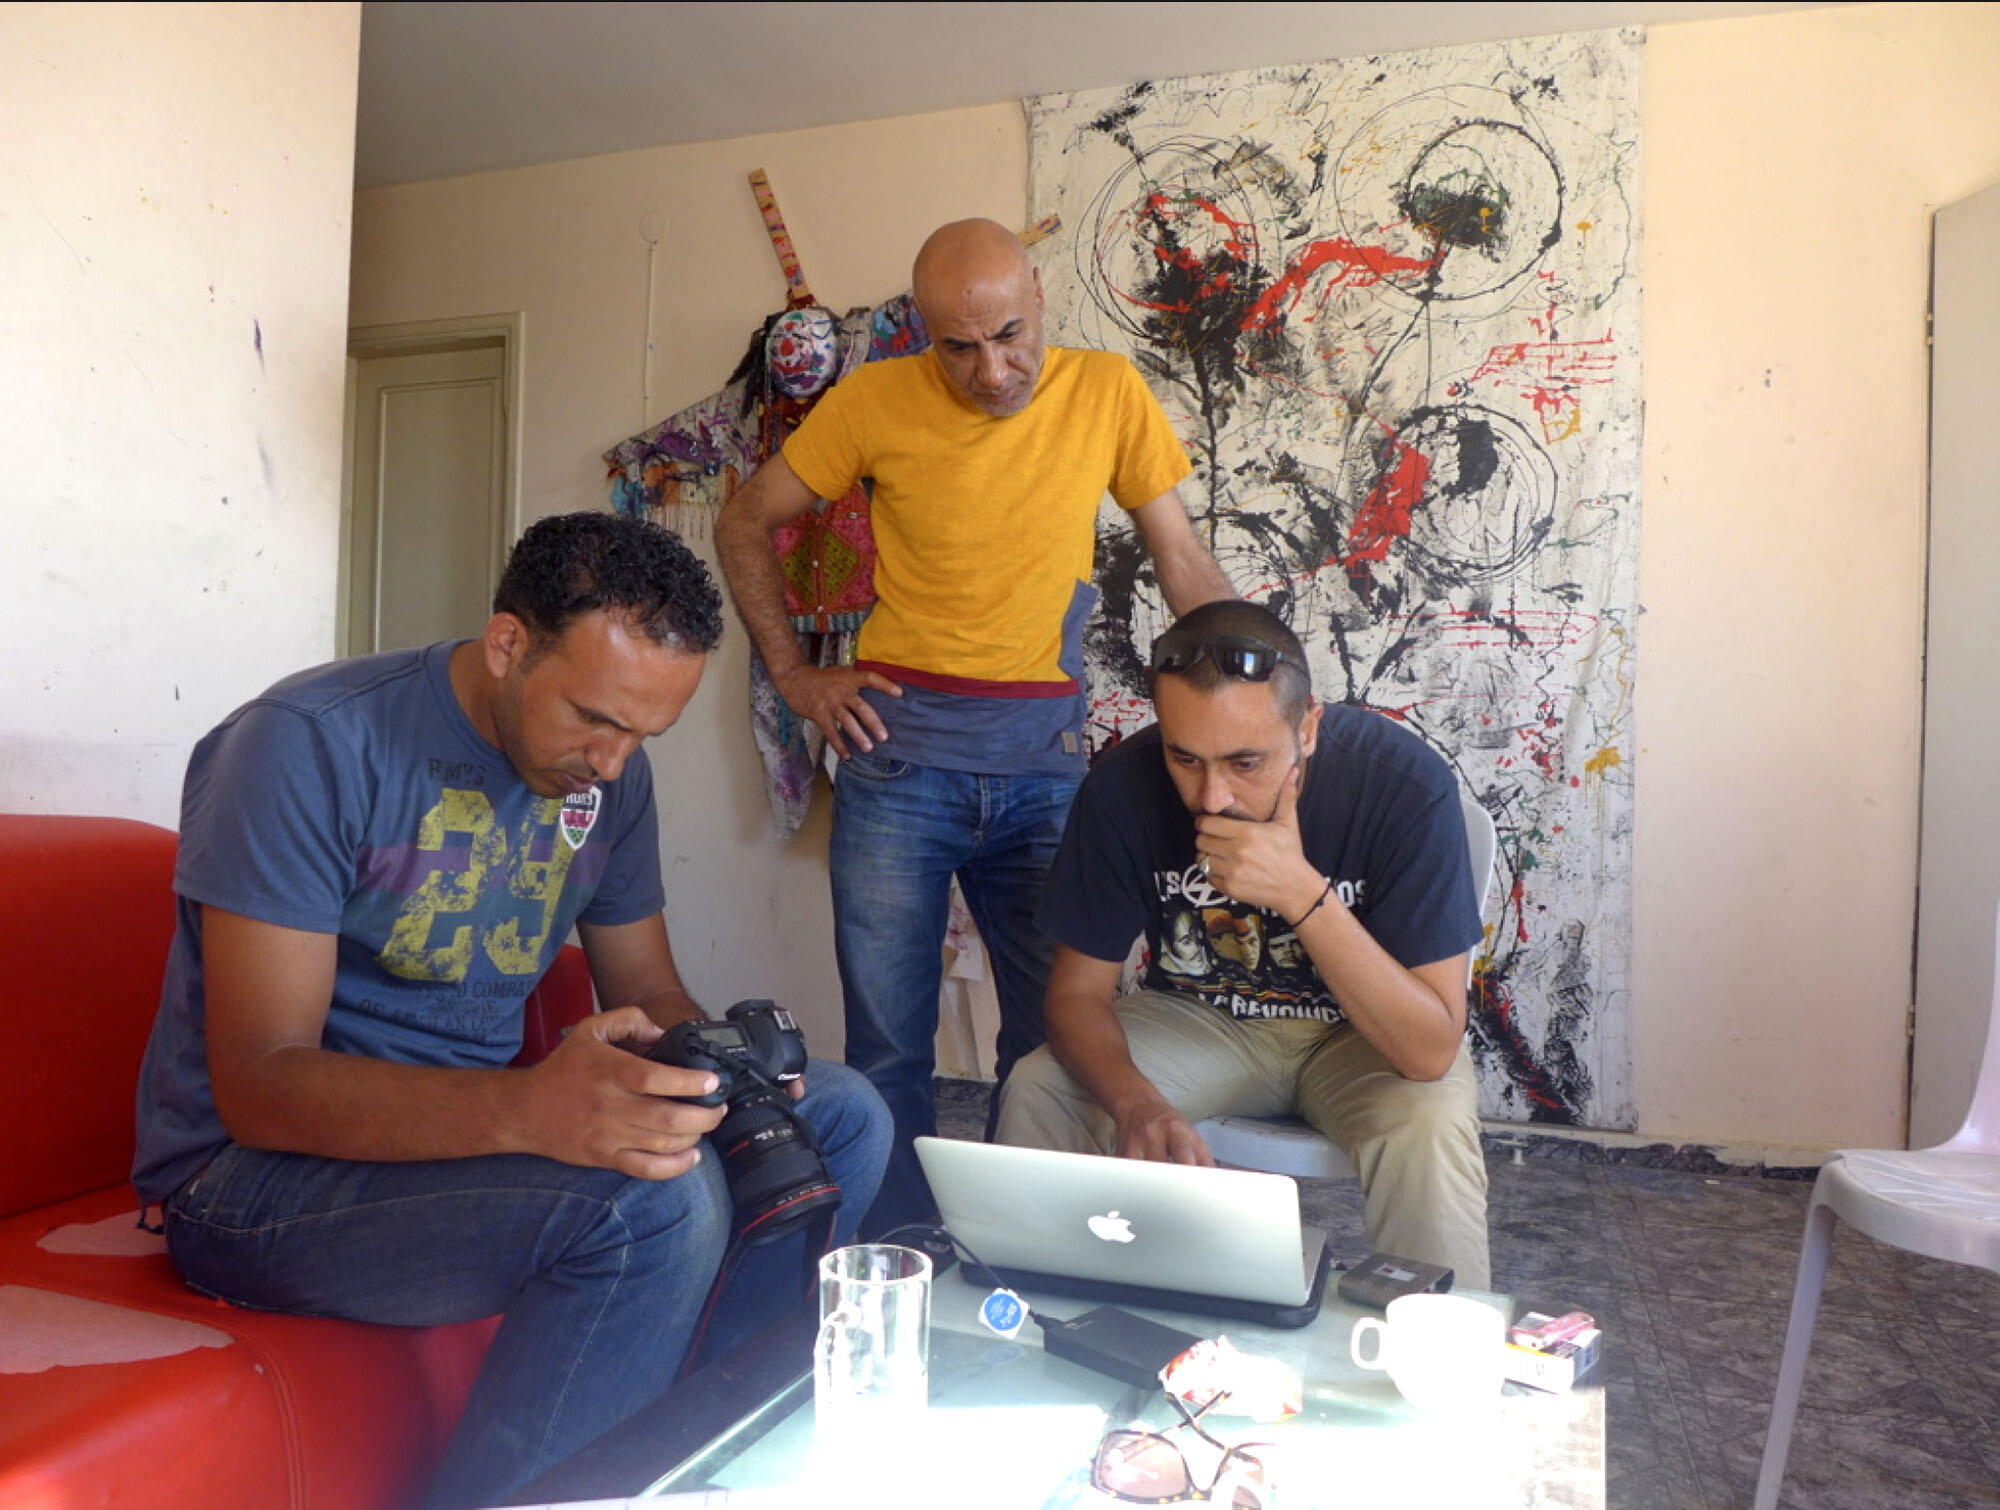 Production meeting with Khalil, Ibrahim, and Emad — producer and cinematographers, respectively.